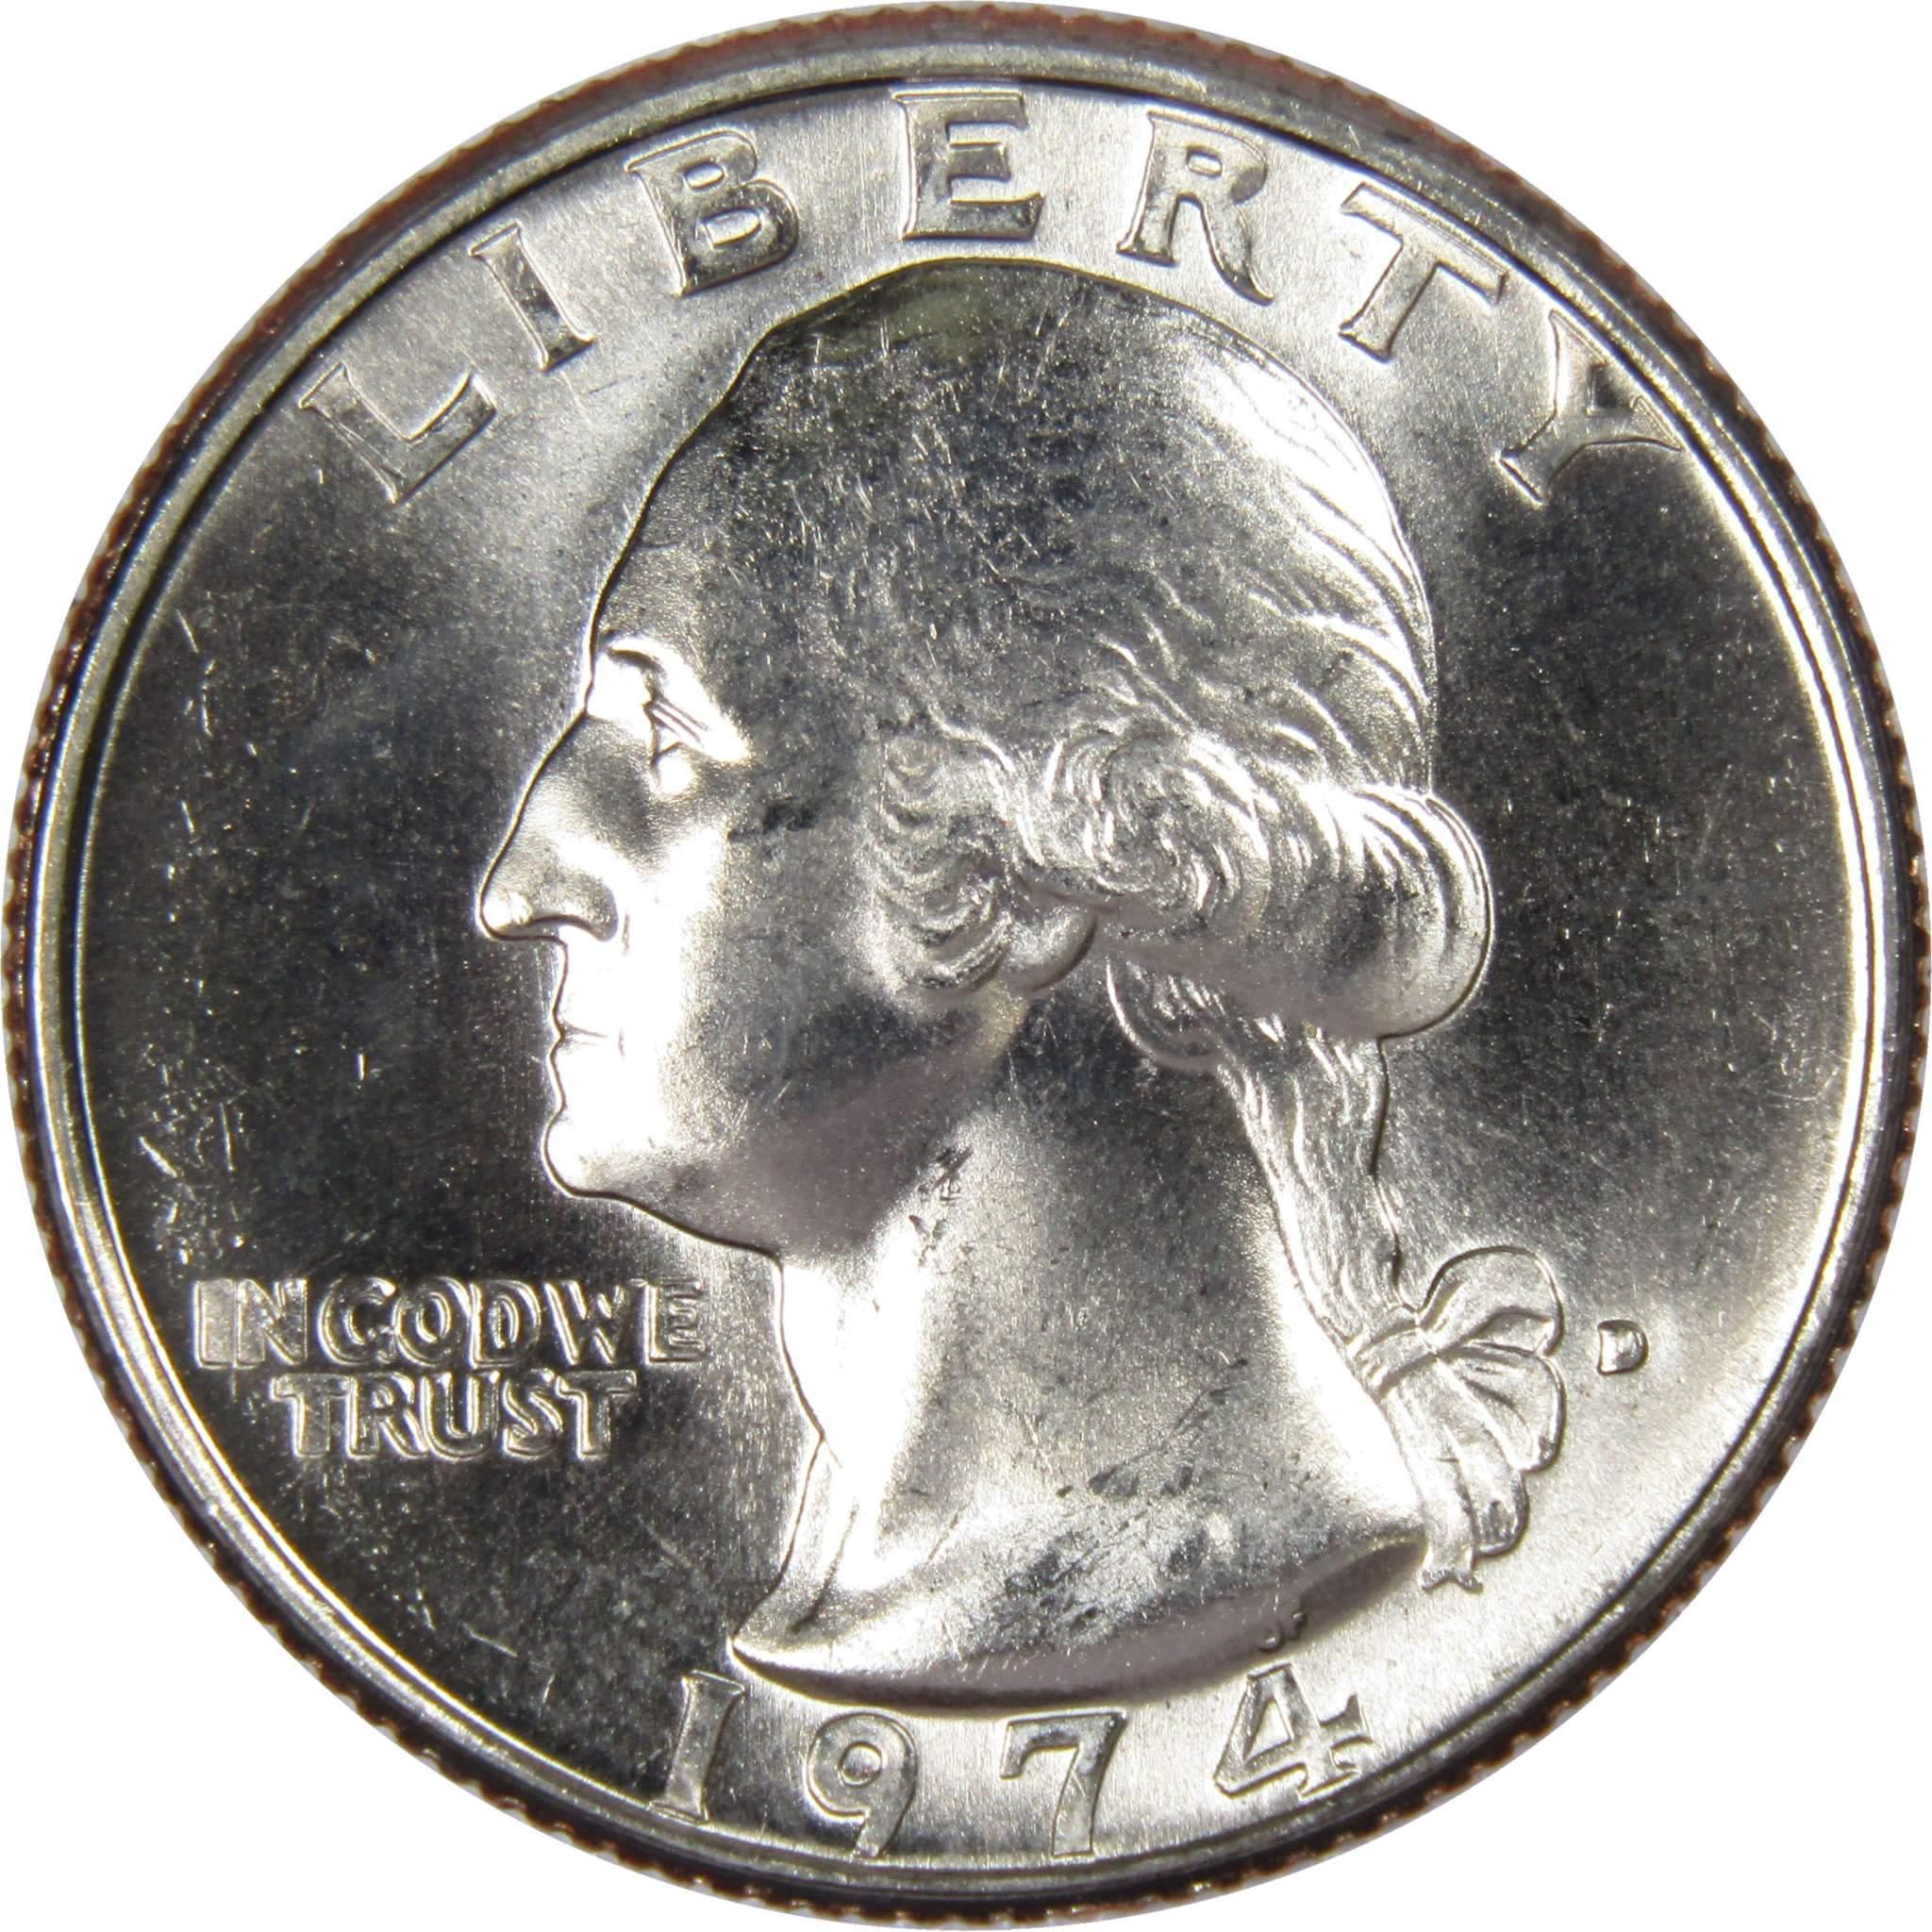 1974 D Washington Quarter BU Uncirculated Mint State 25c US Coin Collectible